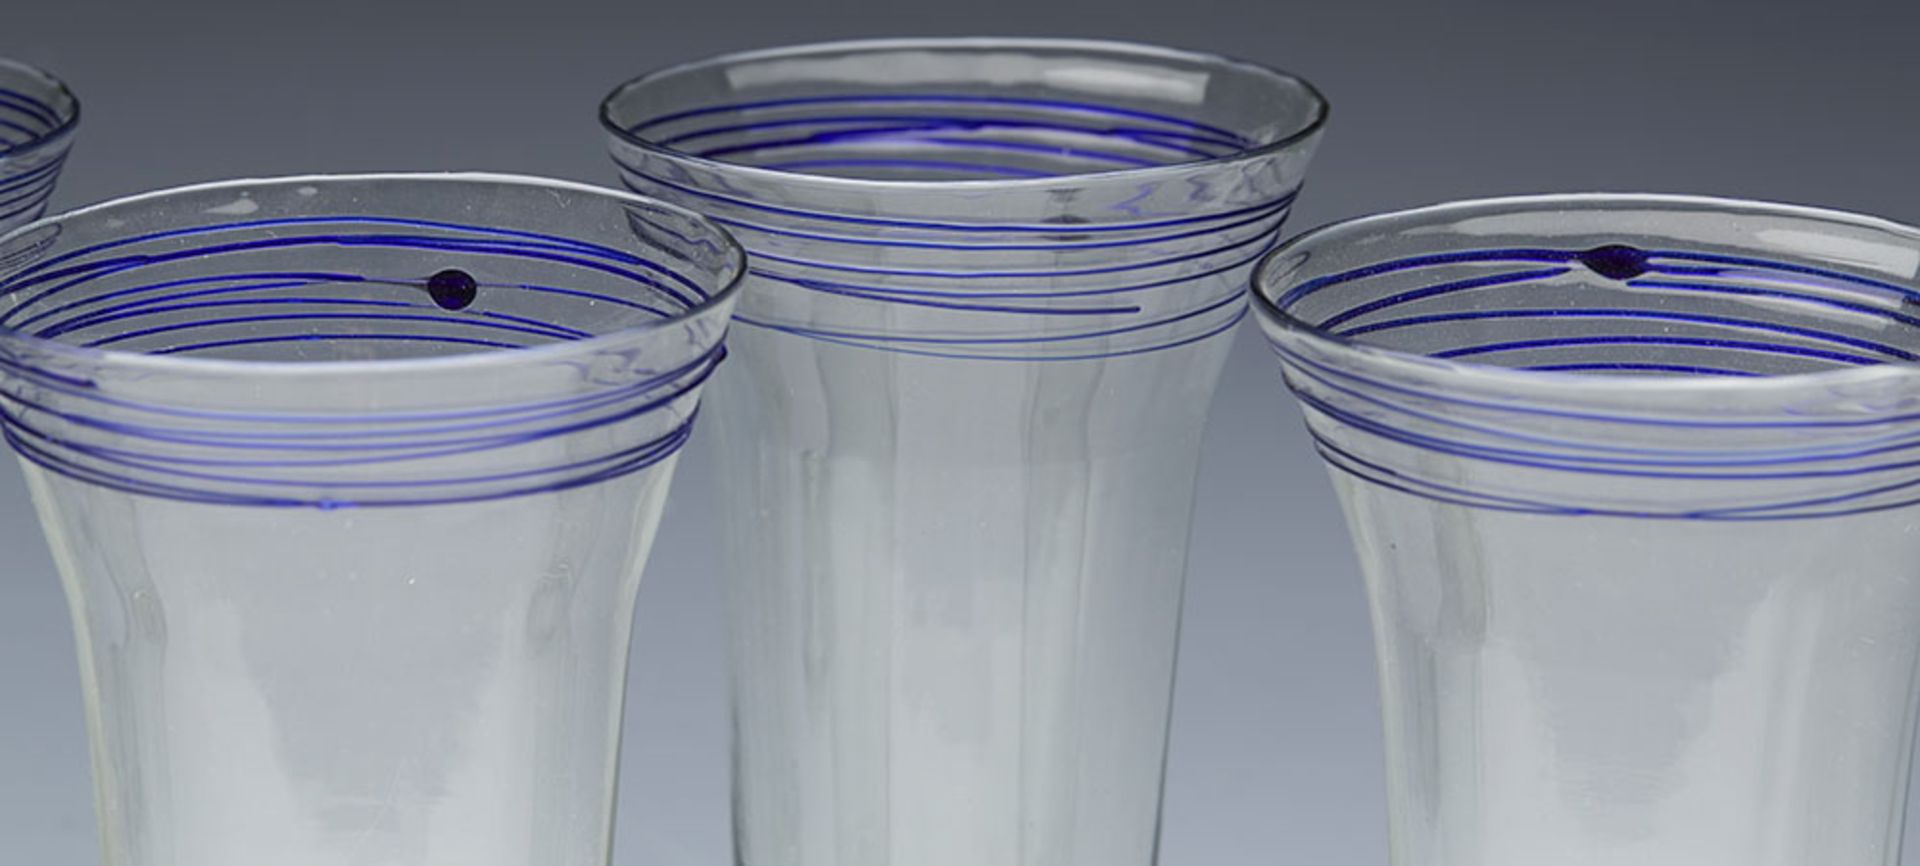 ARTS & CRAFTS SET SIX TUMBLER GLASSES ATTRIBUTED TO JAMES POWELL C.1890 - Image 12 of 14